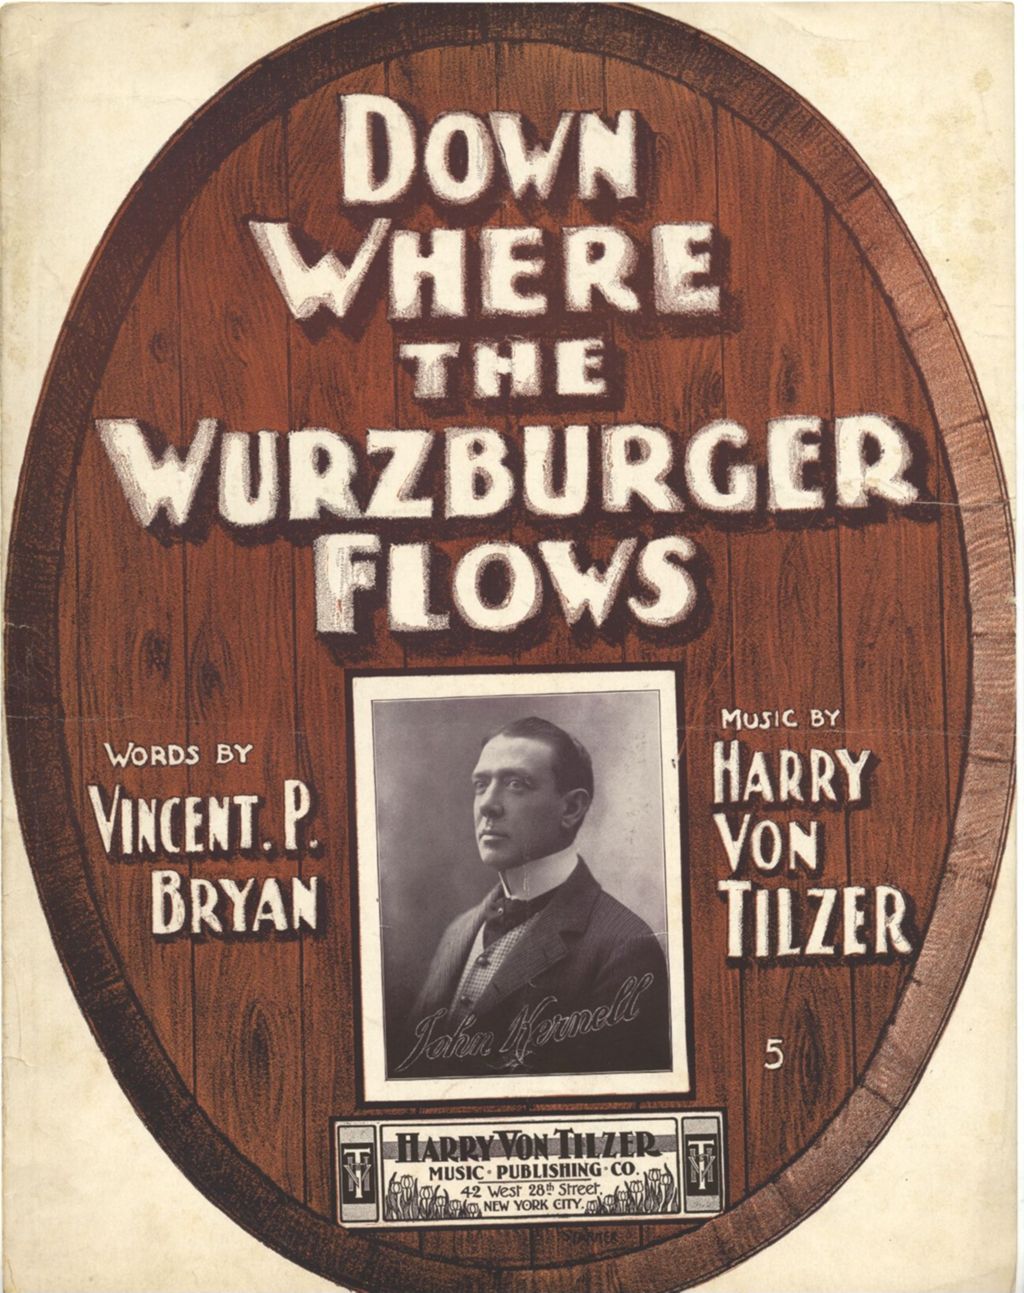 Miniature of Down Where the Wurzburger Flows